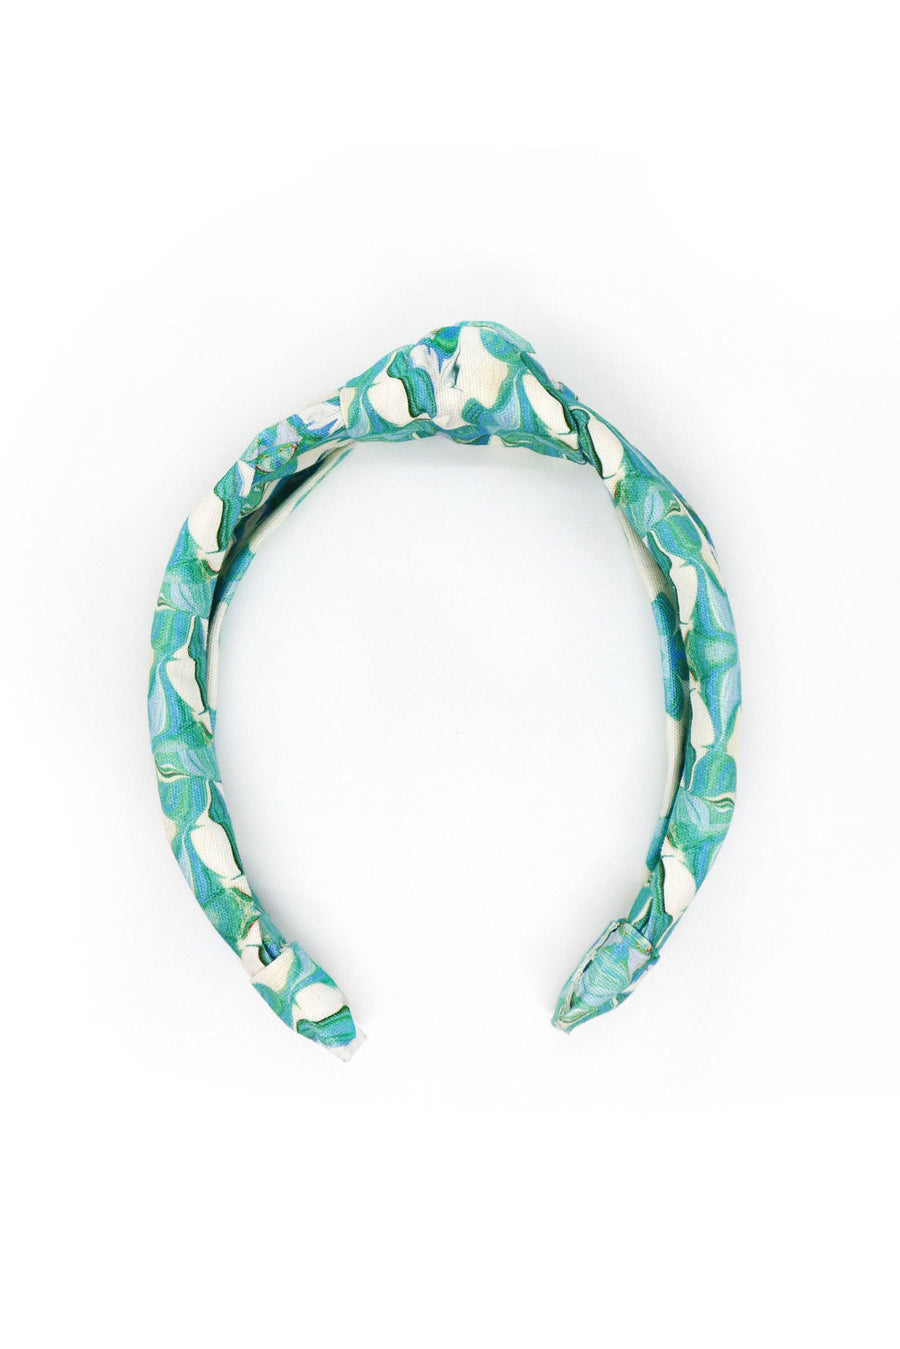 Knotted Headband in Fern Blue by Brooks Avenue